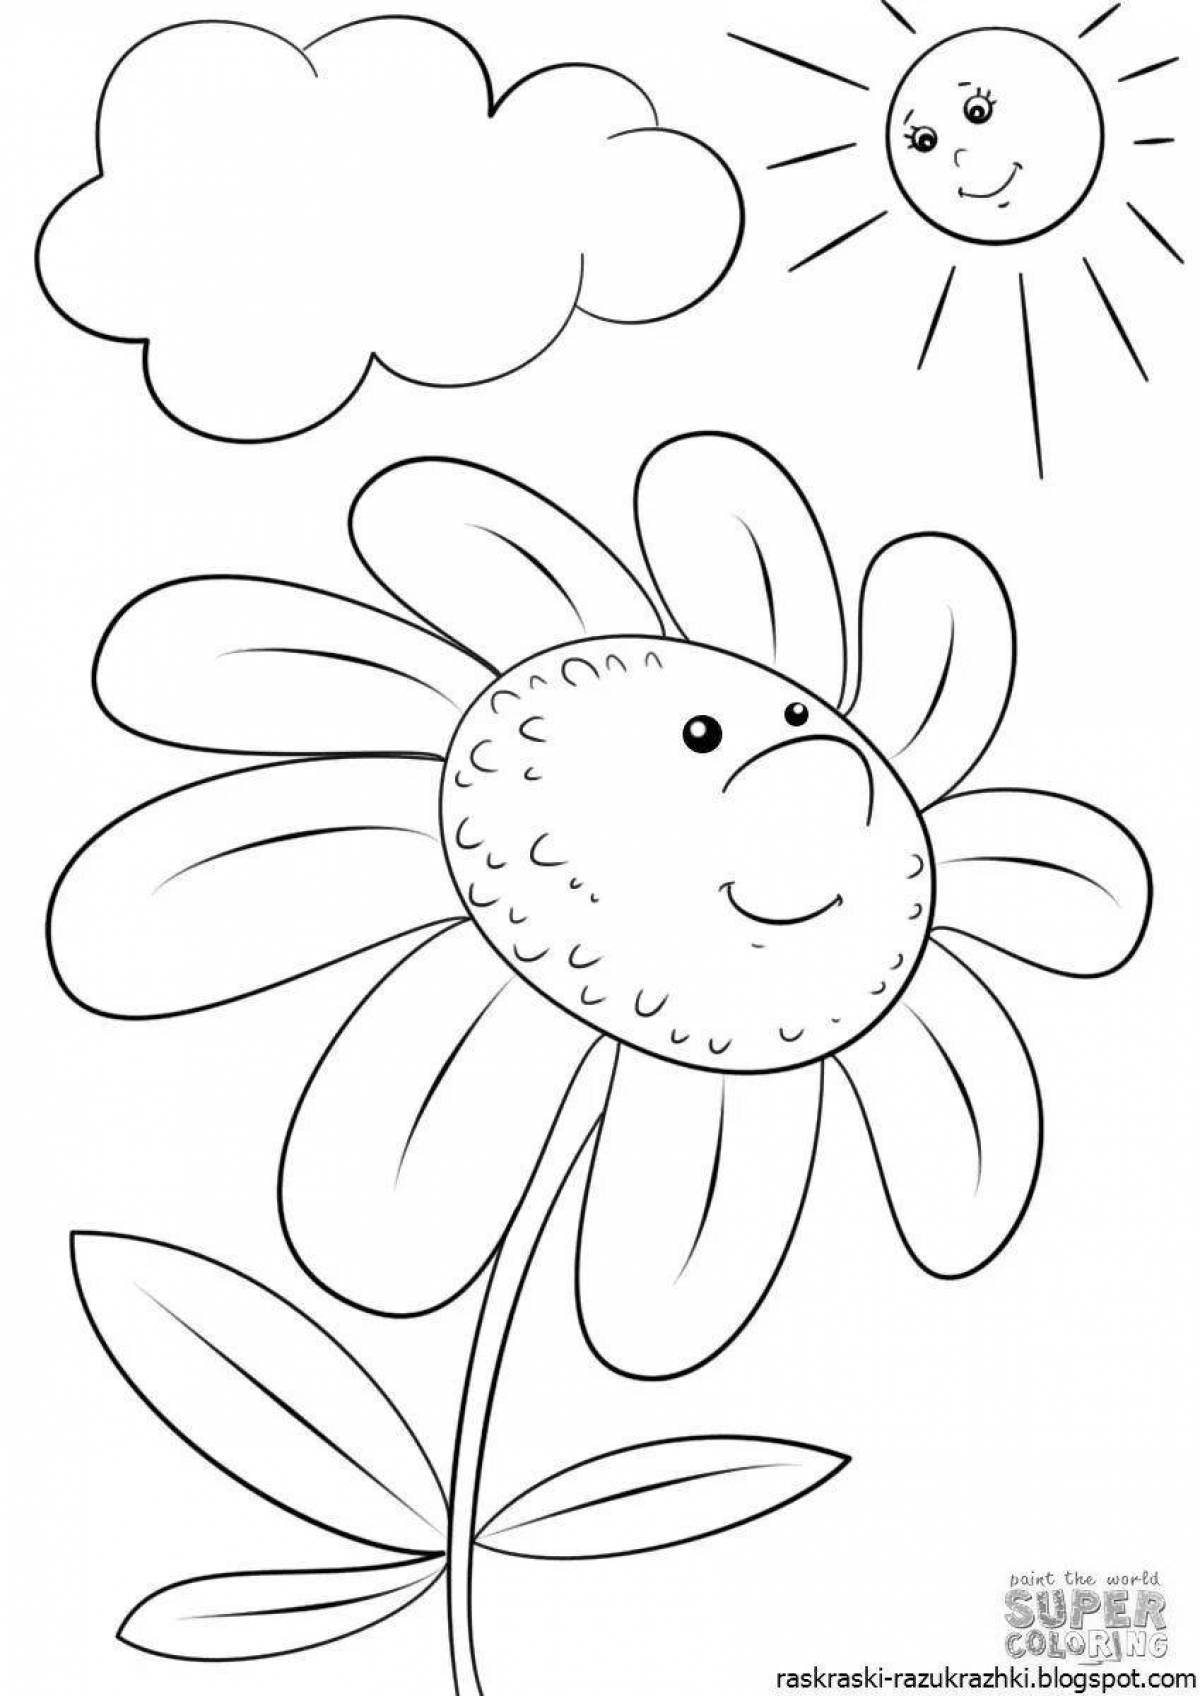 Charming daisy coloring page